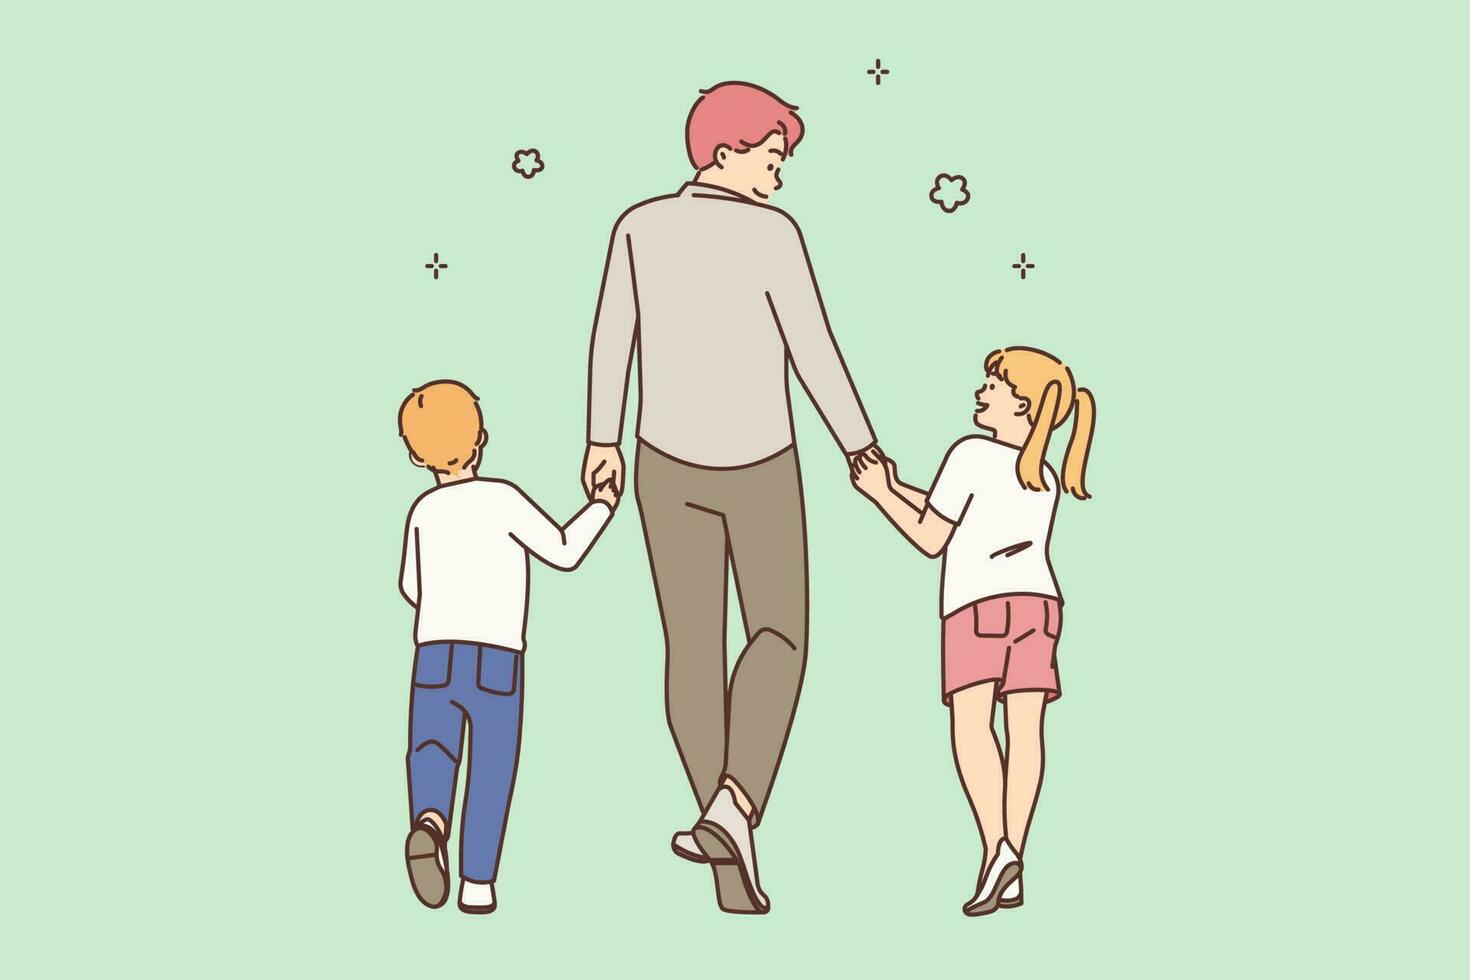 Loving father walking outdoors with kids. Caring young dad and little children holding hands enjoy family time together. Fatherhood. Vector illustration.